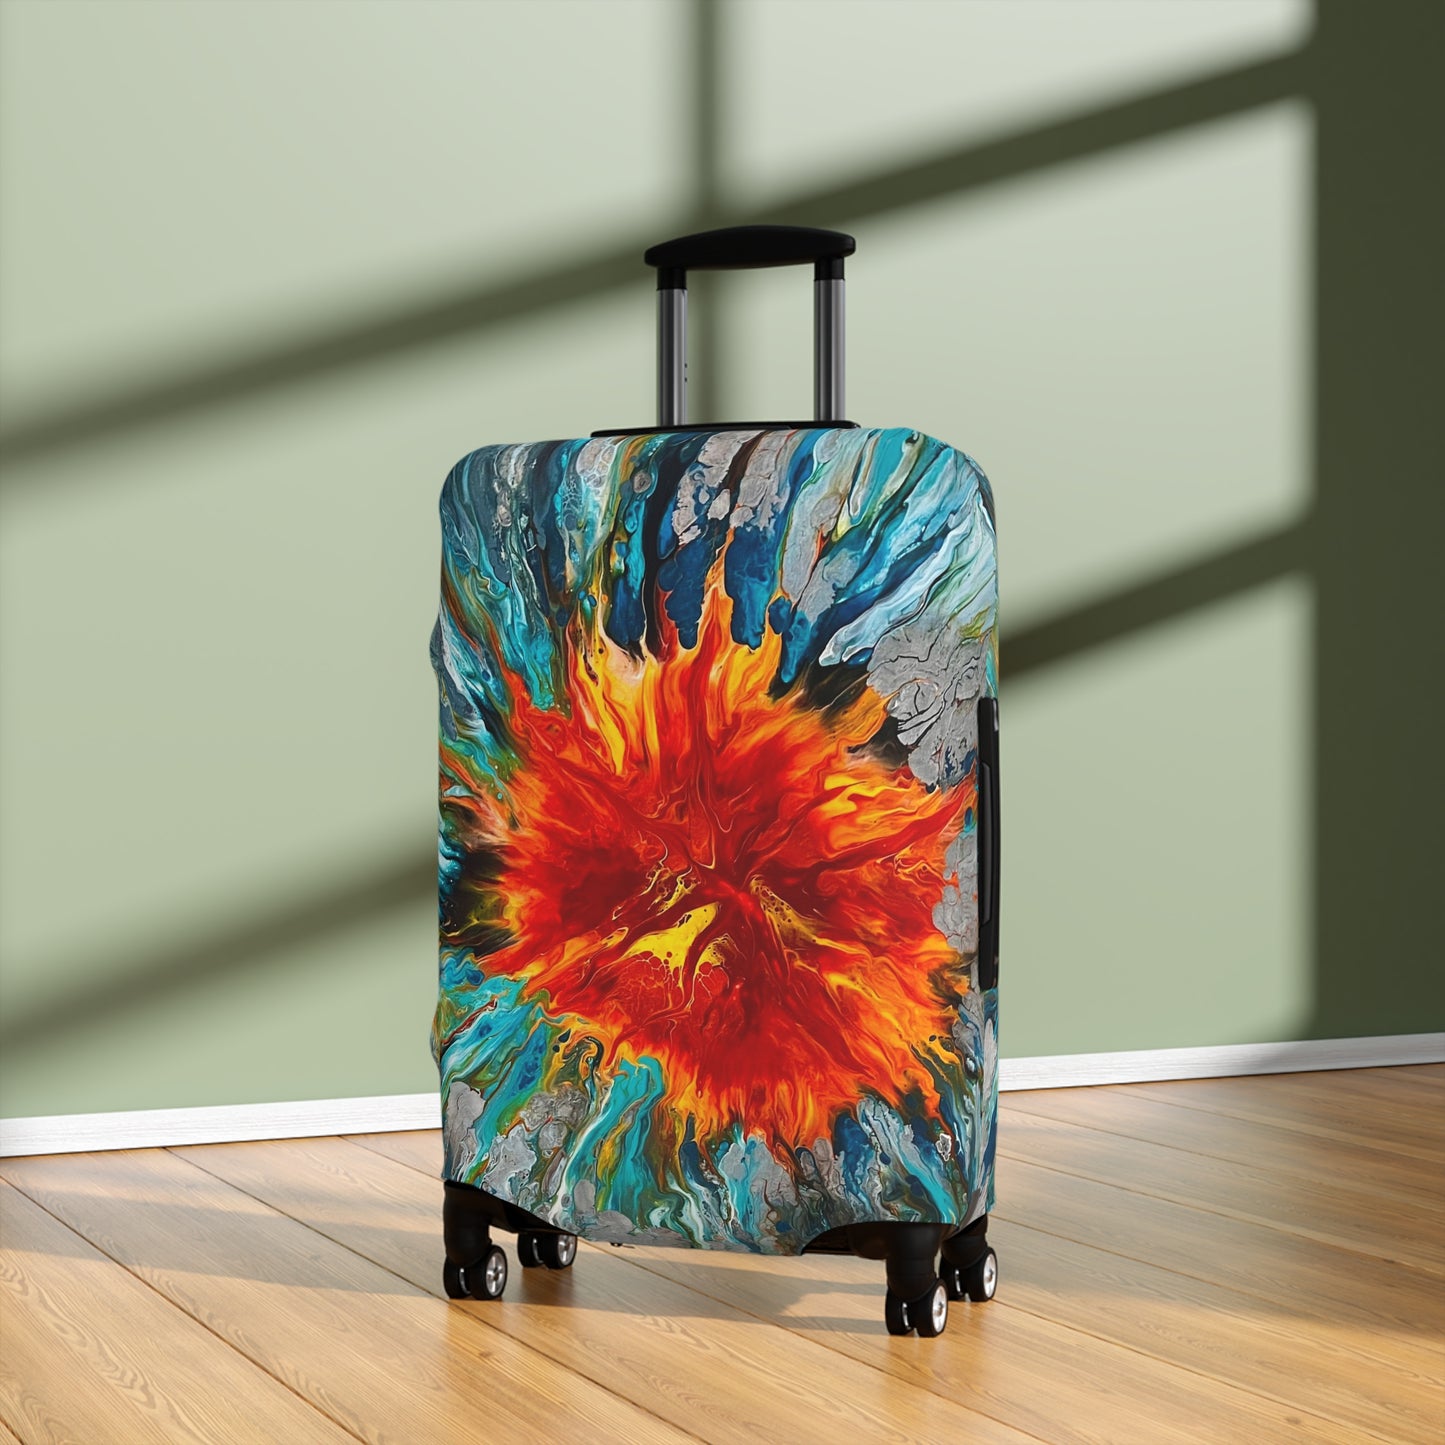 Fire and Water Individualized Carry On Suitcase/Luggage Cover